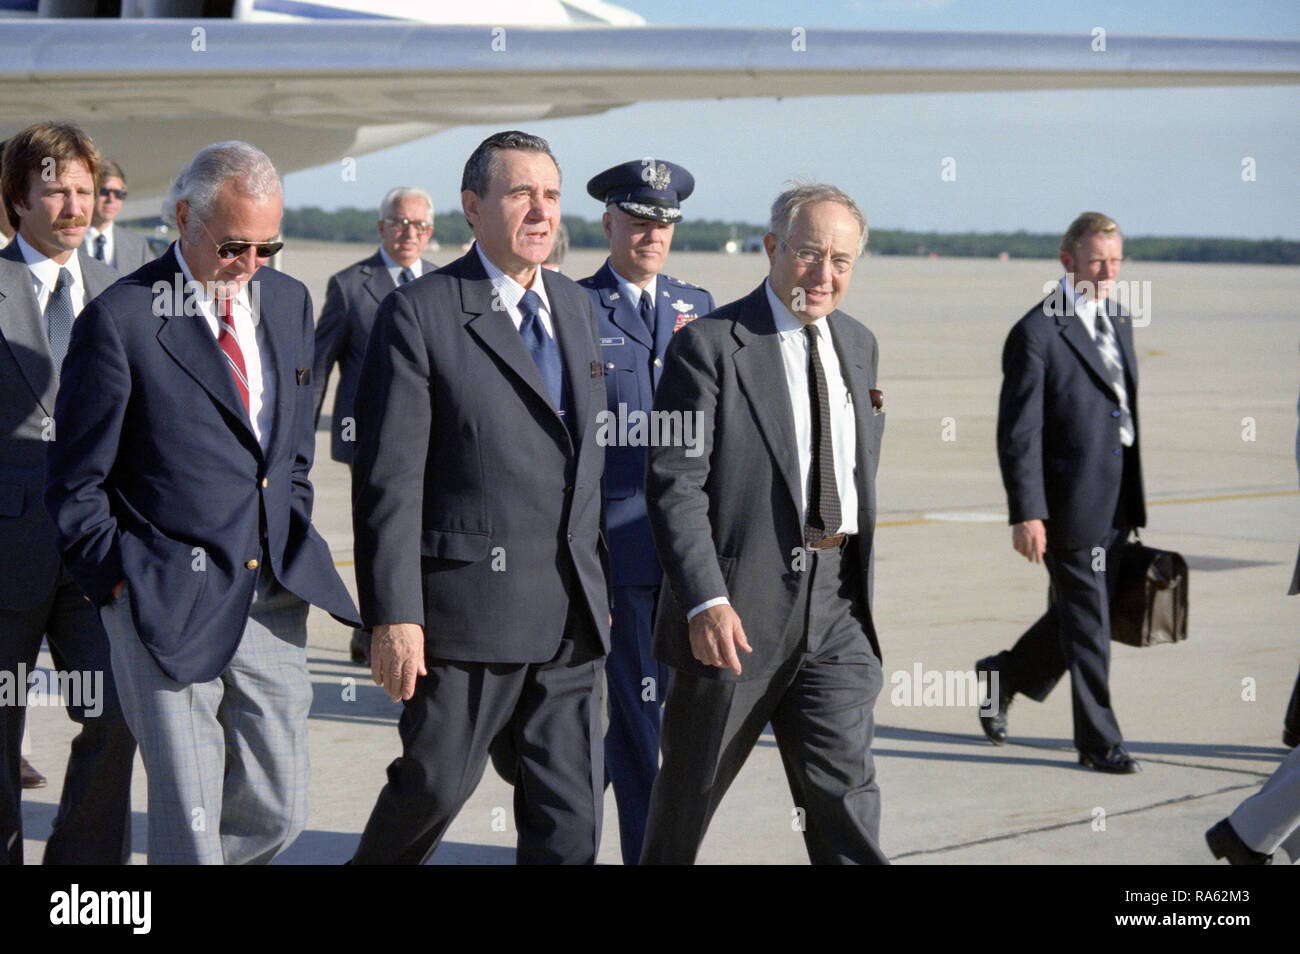 1978 - Soviet Foreign Minister Andrei Gromyko (left of center) arrives in the US for a state visit. Stock Photo